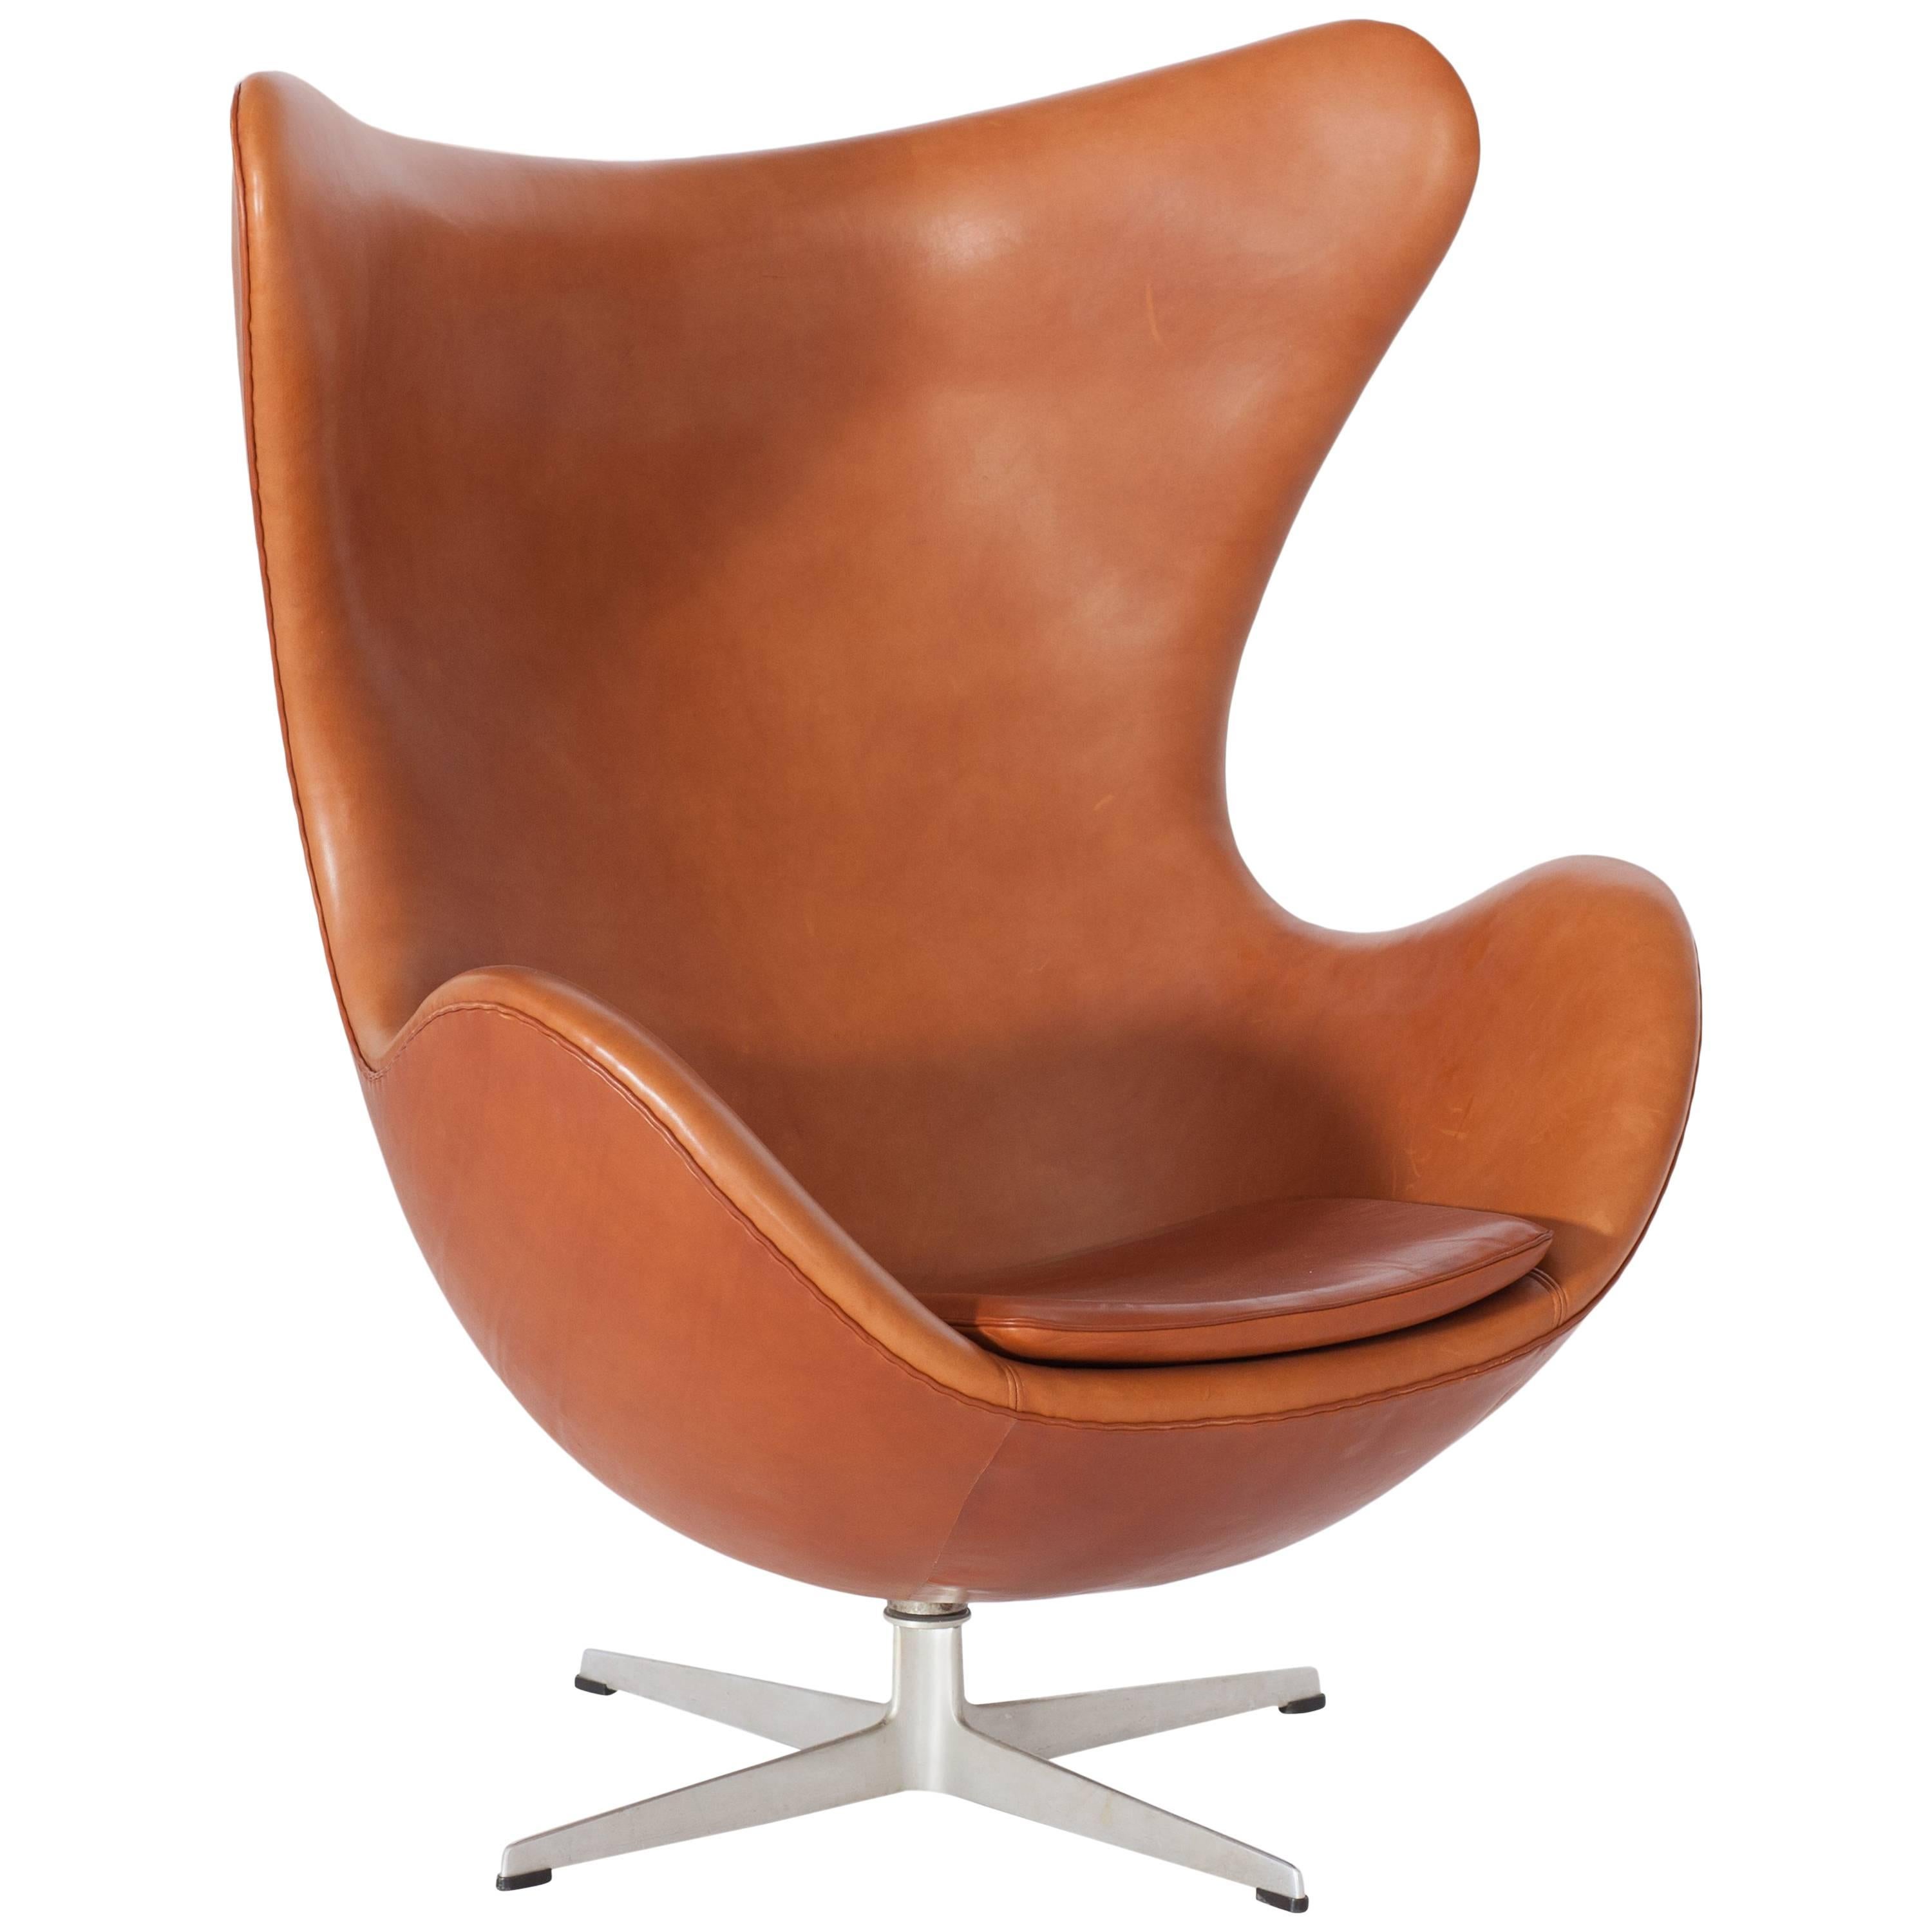 Egg Chair in Cognac Leather by Arne Jacobsen